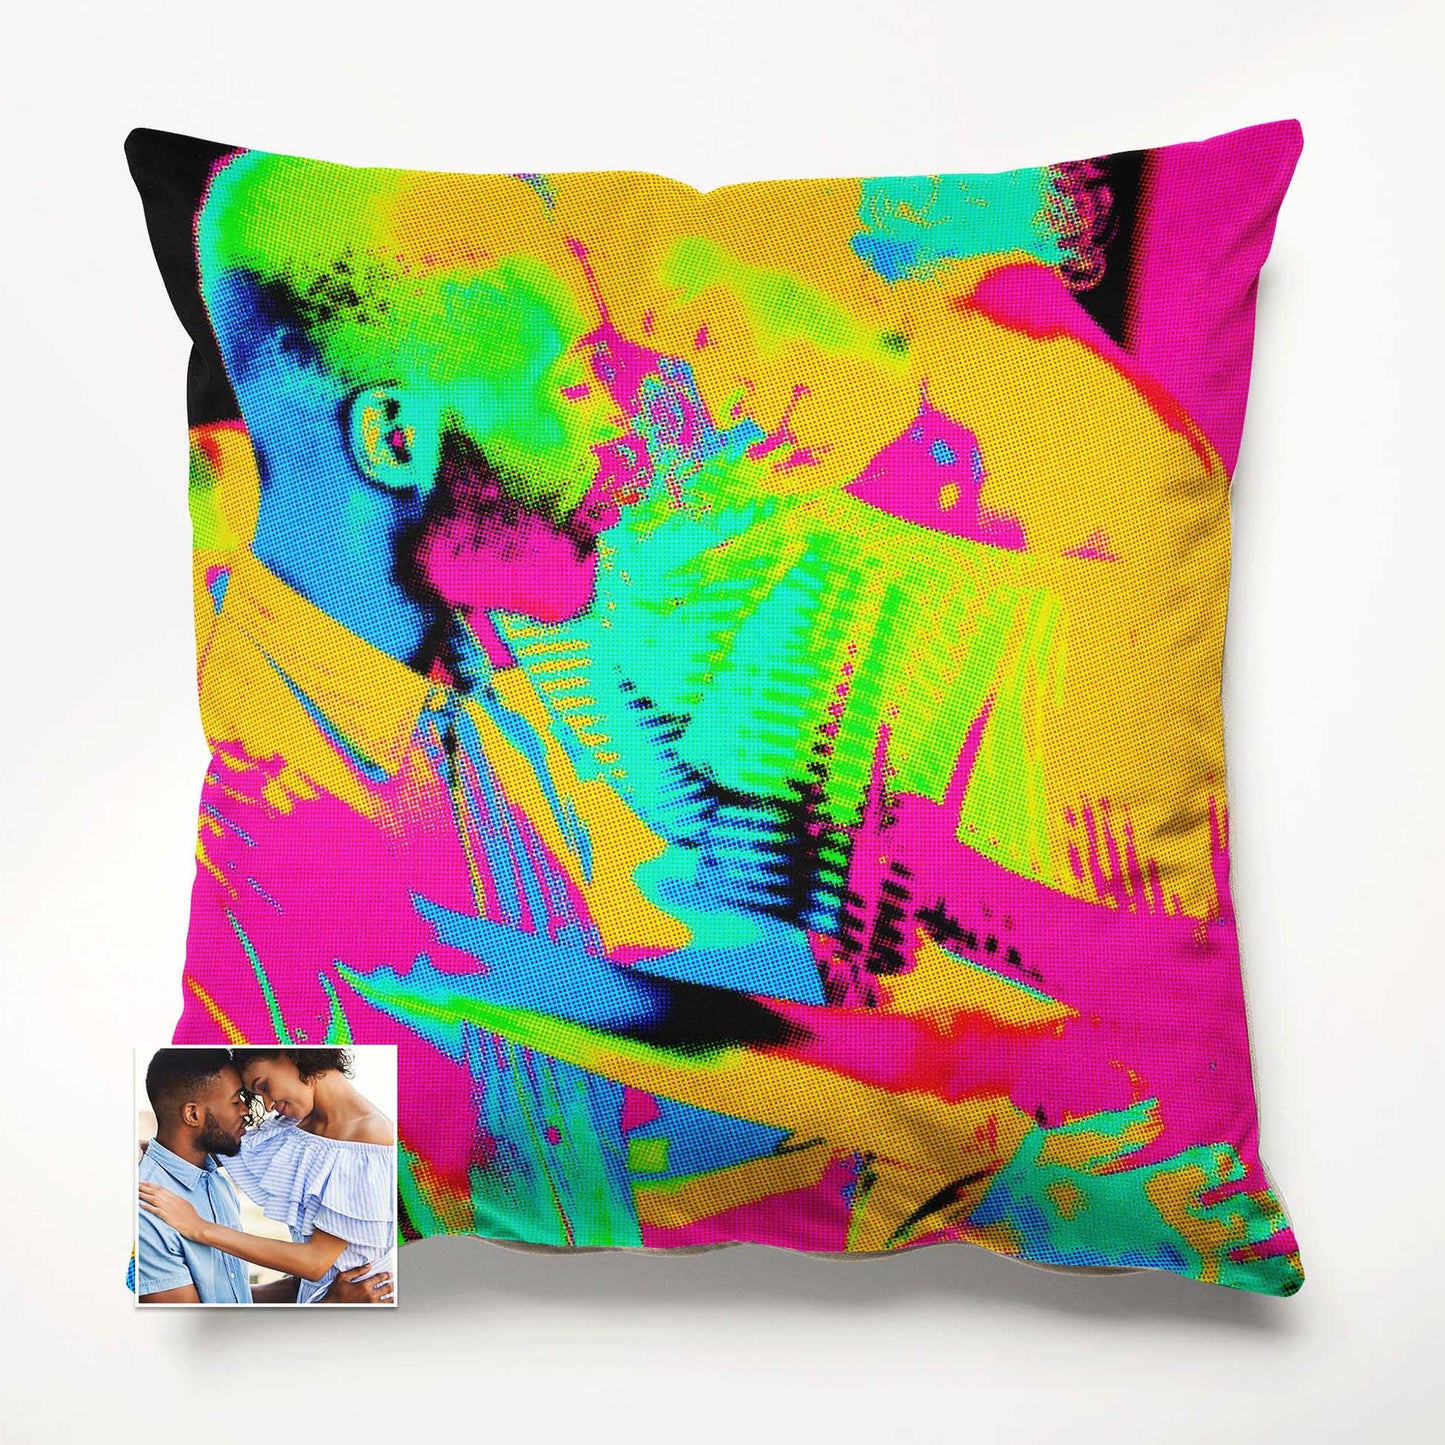 Add a touch of artistic expression to your home decor with the Personalised Pop Art Cushion. Printed from your photo, it showcases a unique and quirky design that stimulates imagination. Handmade with soft velvet